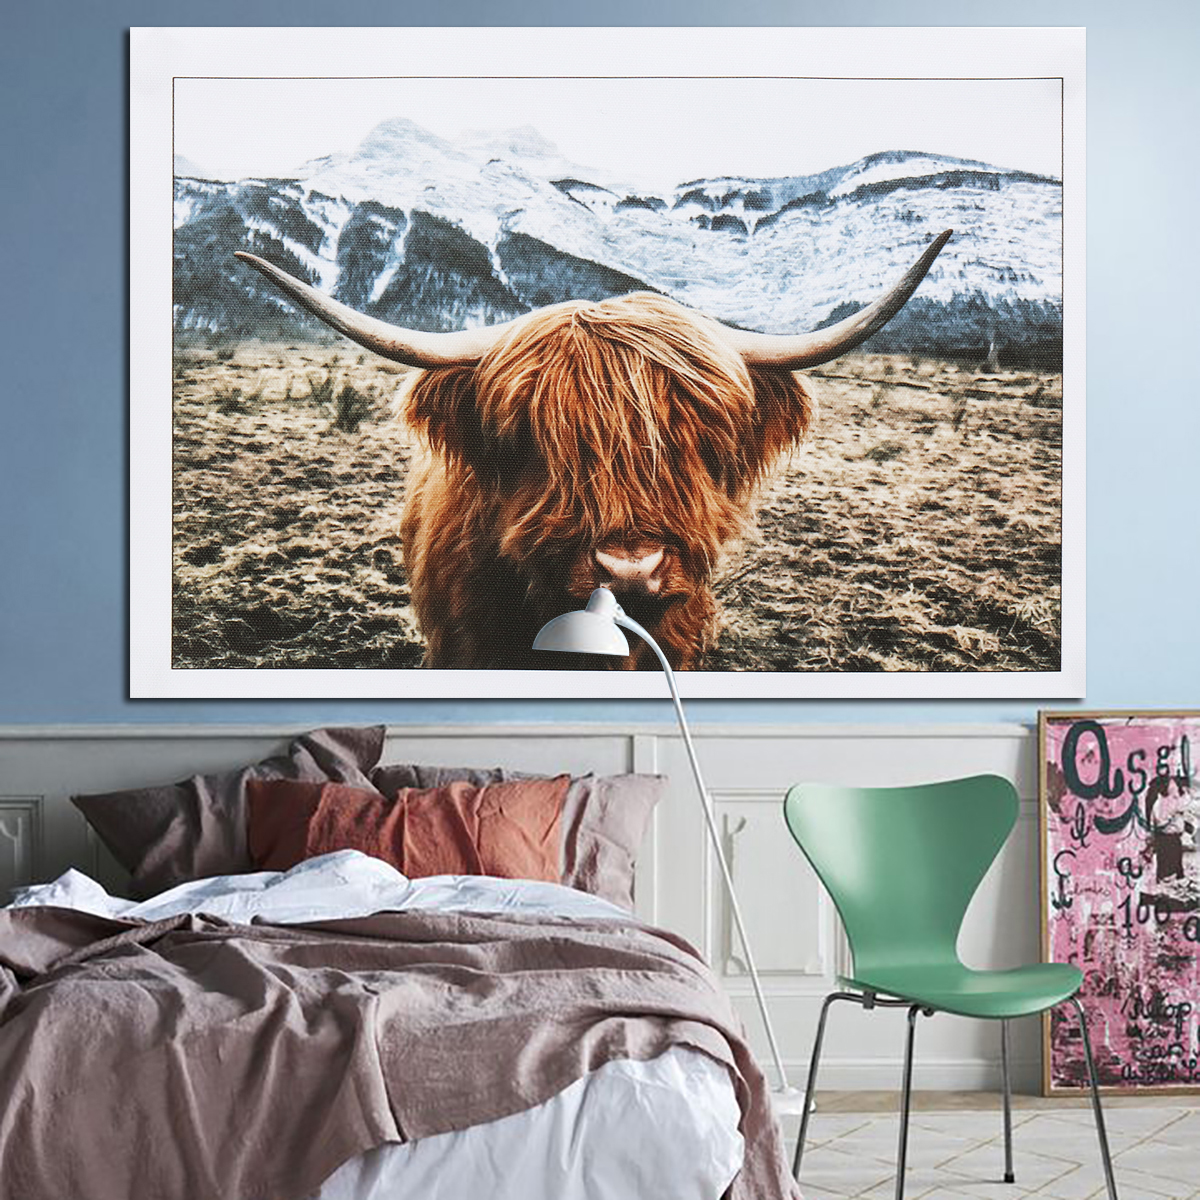 1-Piece-Canvas-Print-Painting-Highland-Cow-Poster-Wall-Decorative-Printing-Art-Pictures-Frameless-Wa-1743443-5